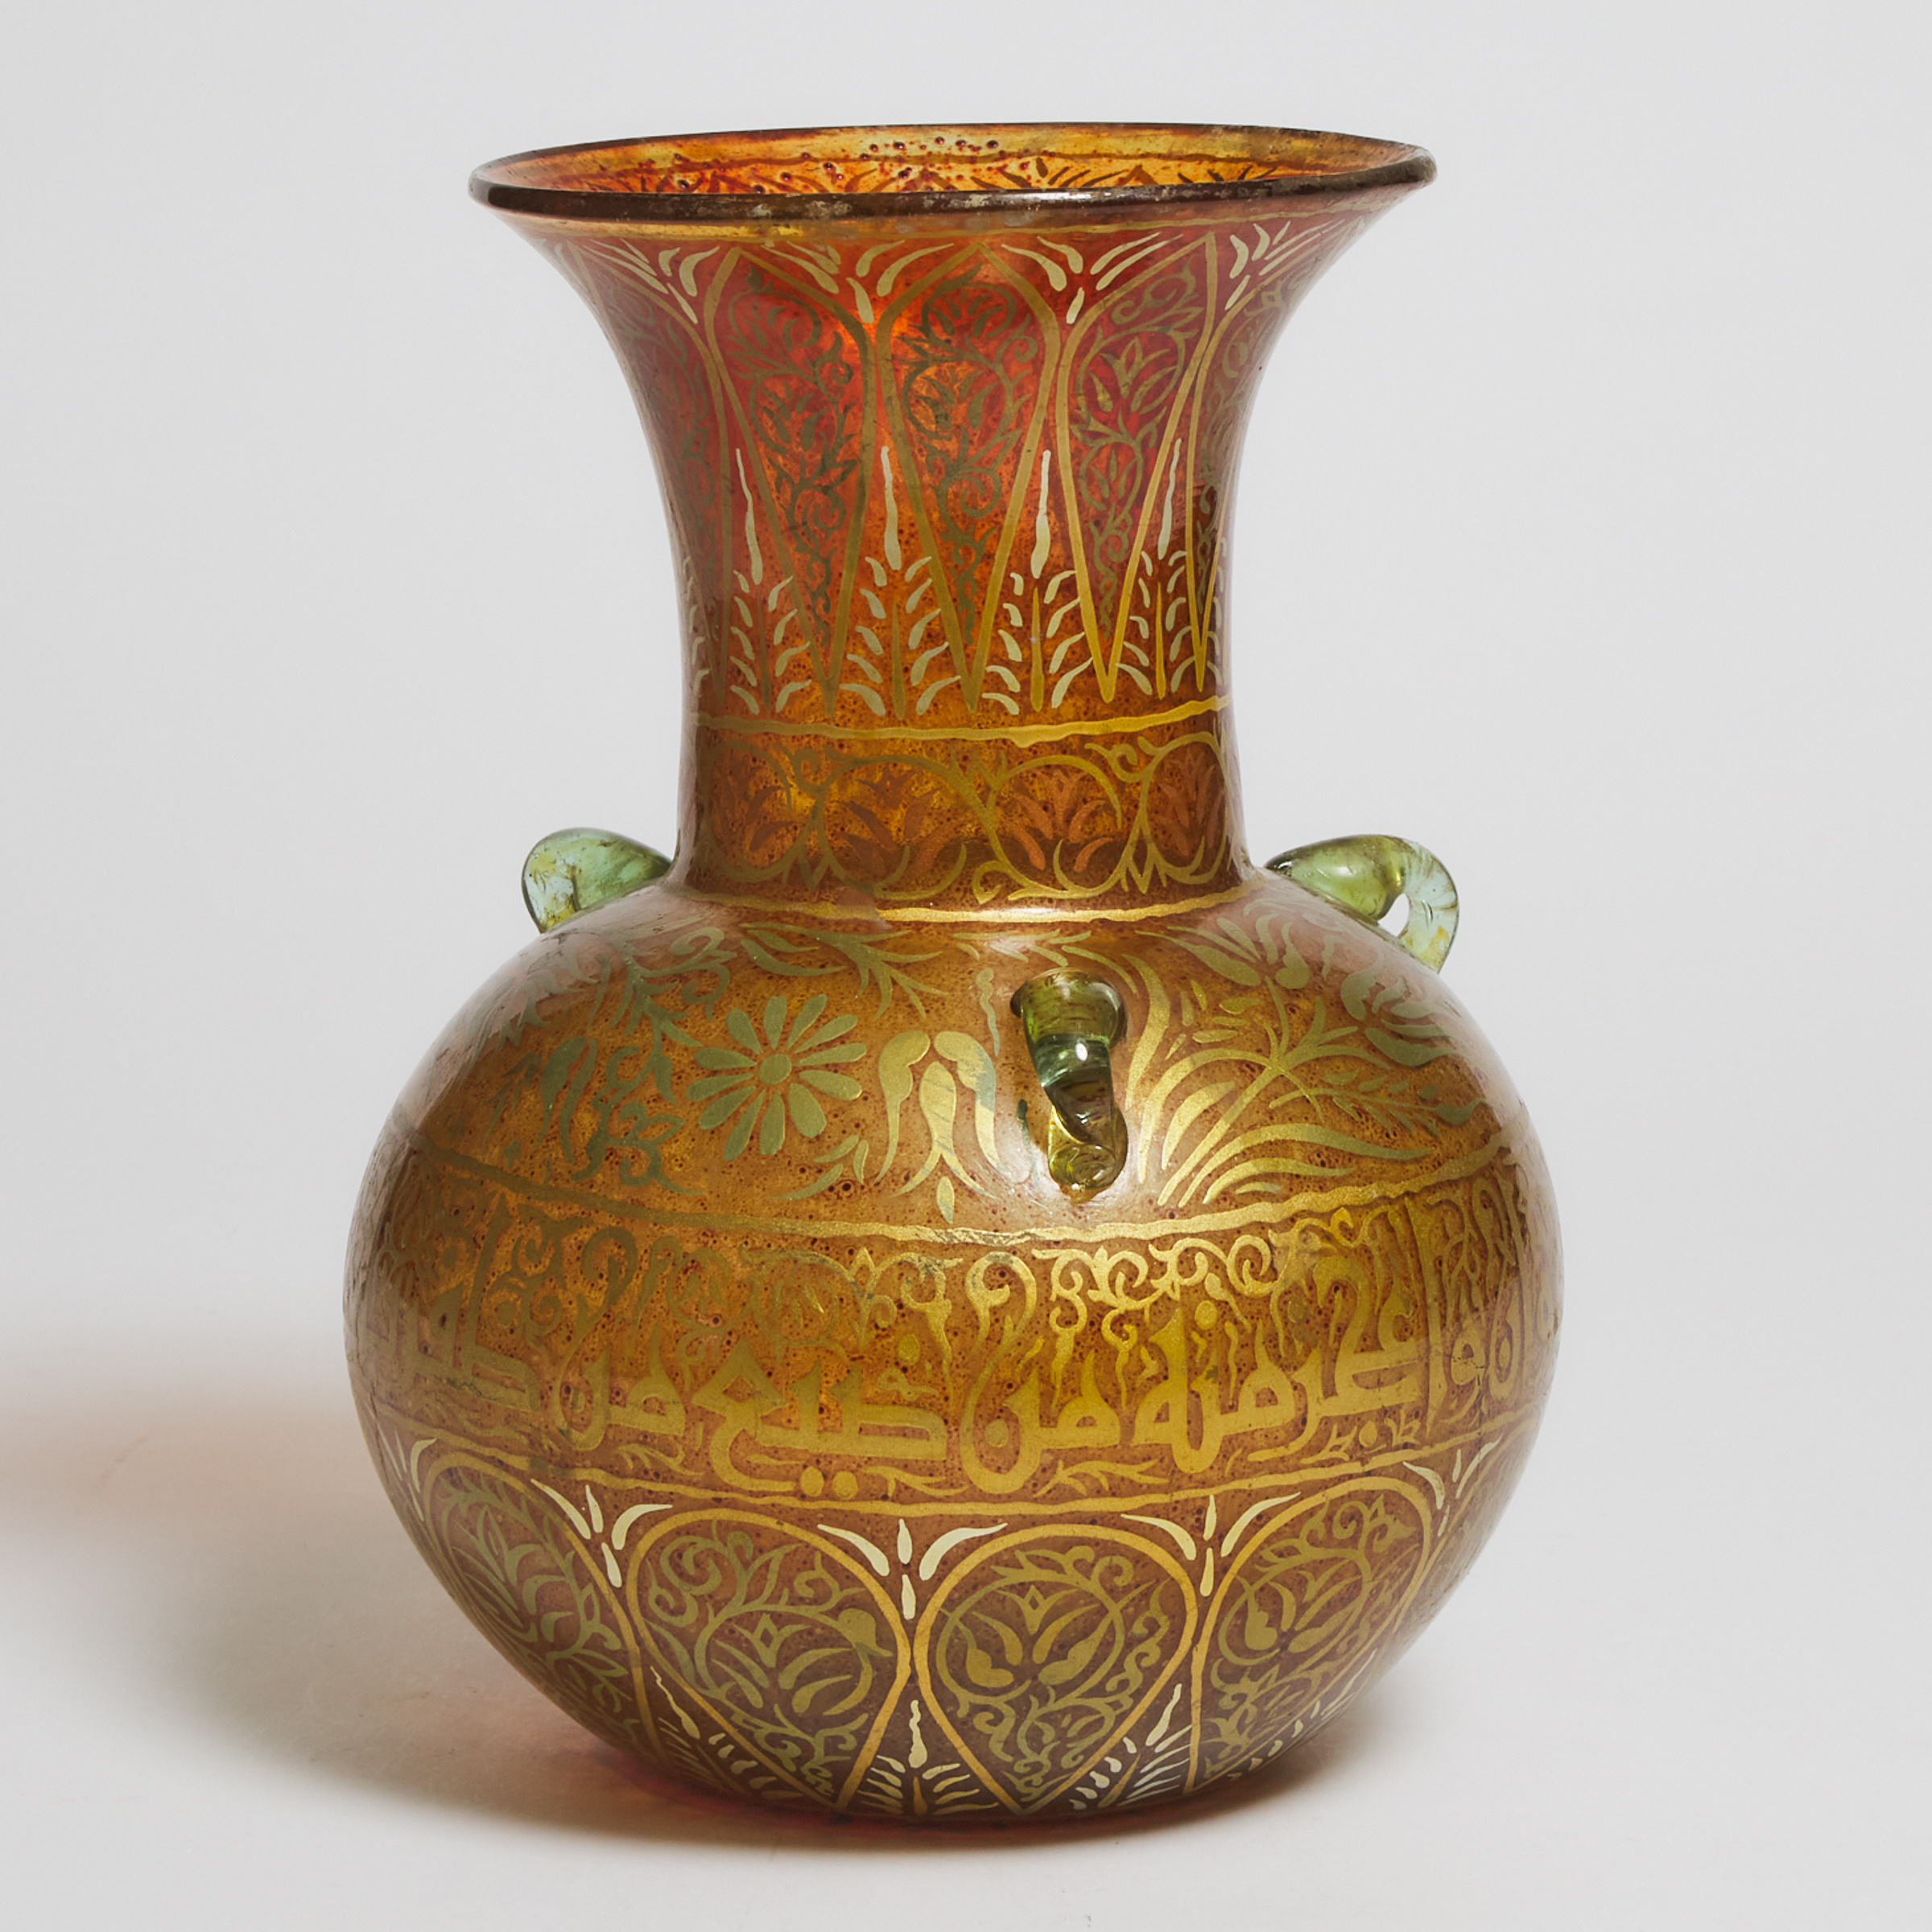 Middle Eastern Painted and Gilt Glass Mosque Lamp, late 19th century